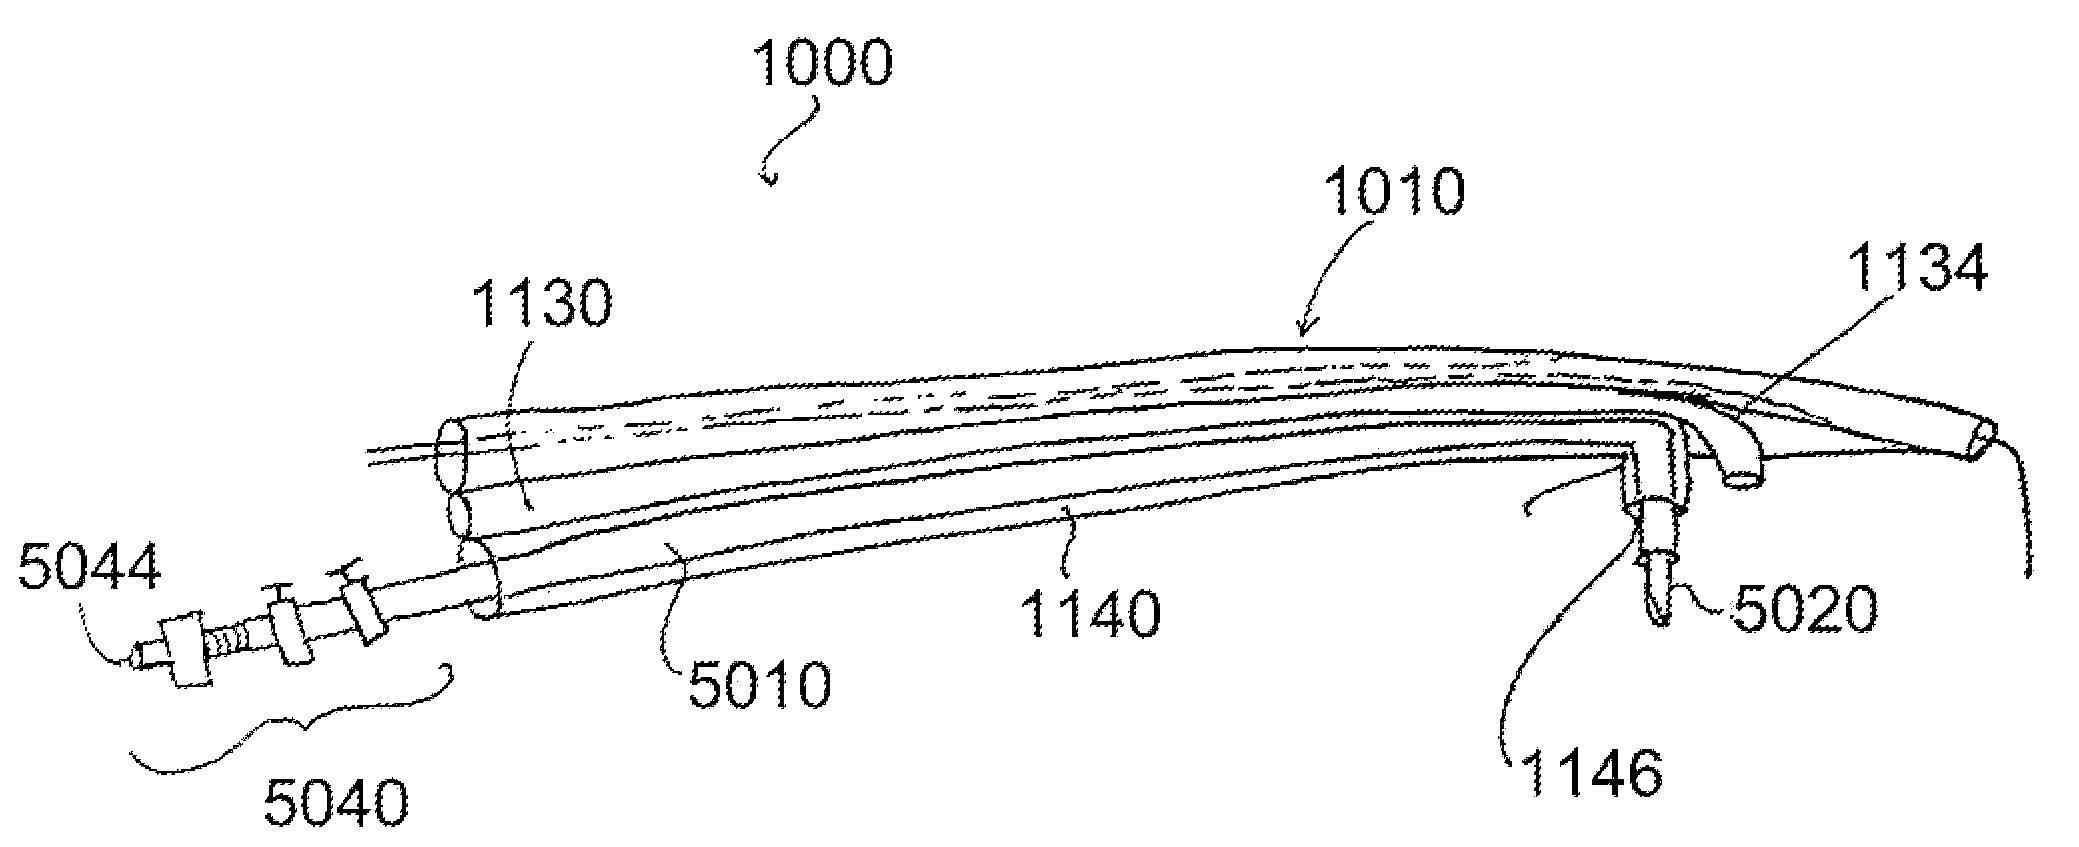 Devices, systems, and methods for obtaining biopsy tissue samples